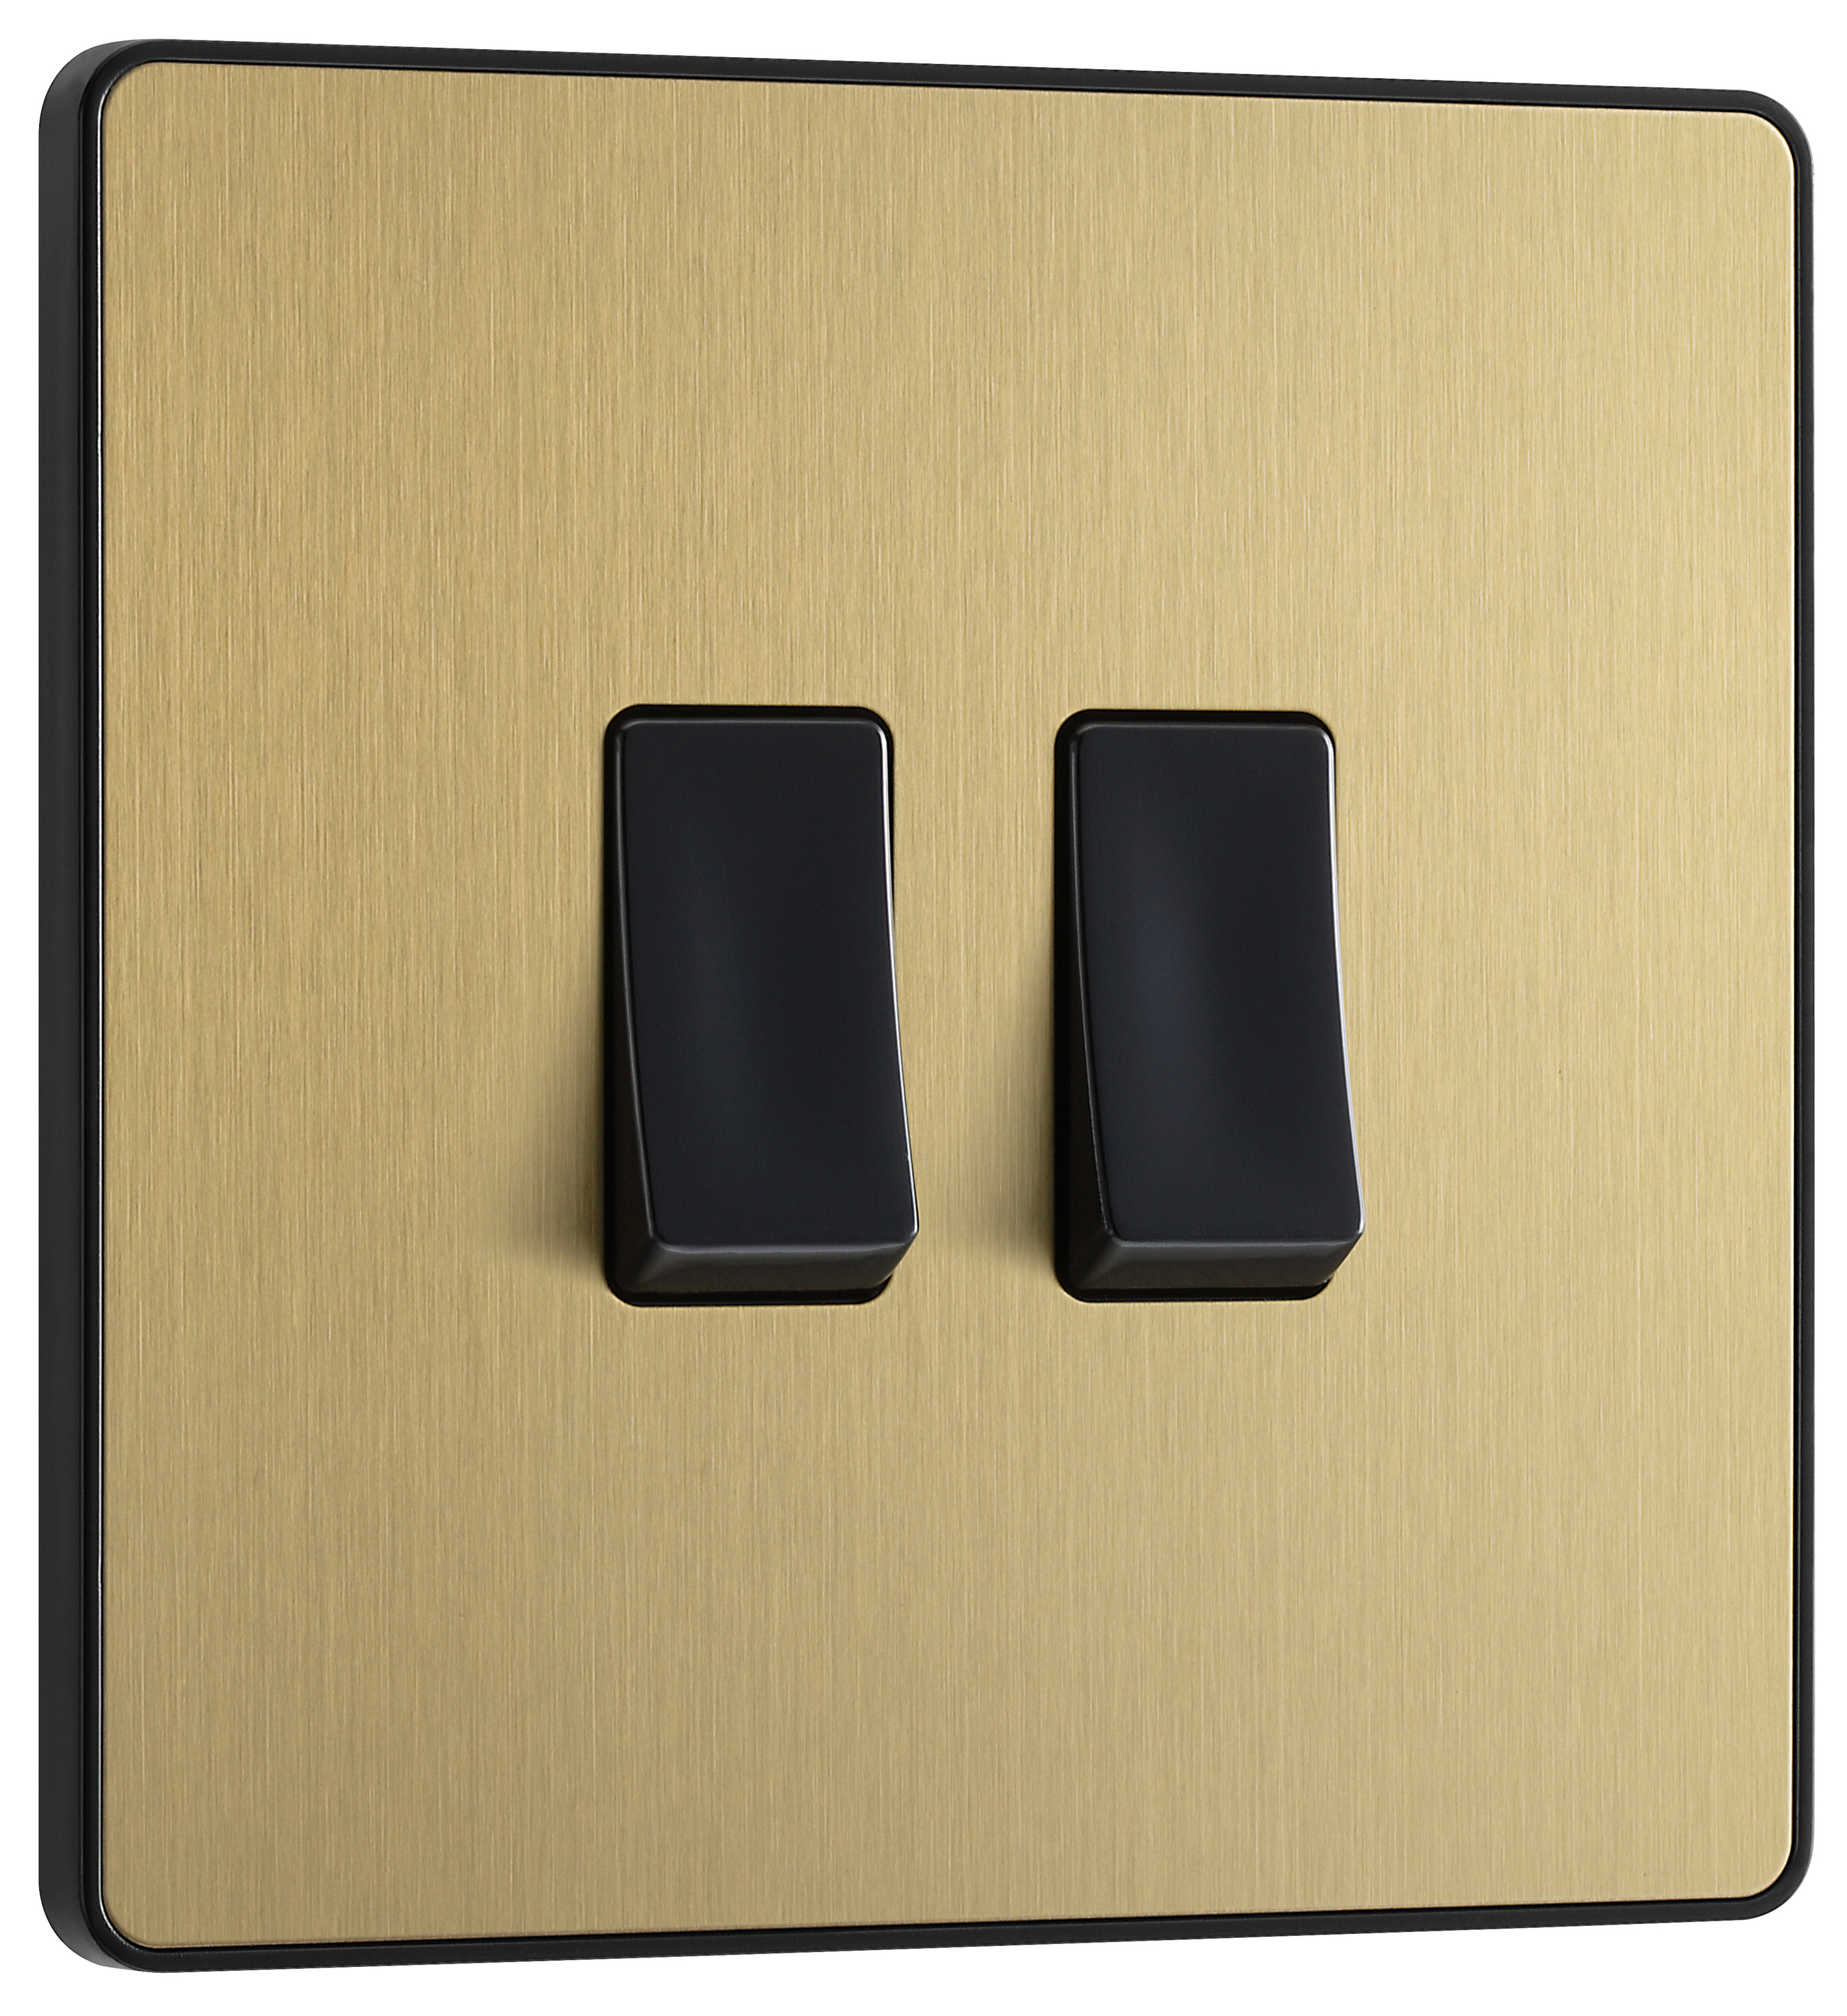 BG Evolve Brushed Brass 20A 16Ax Double Light Switch - 2 Way